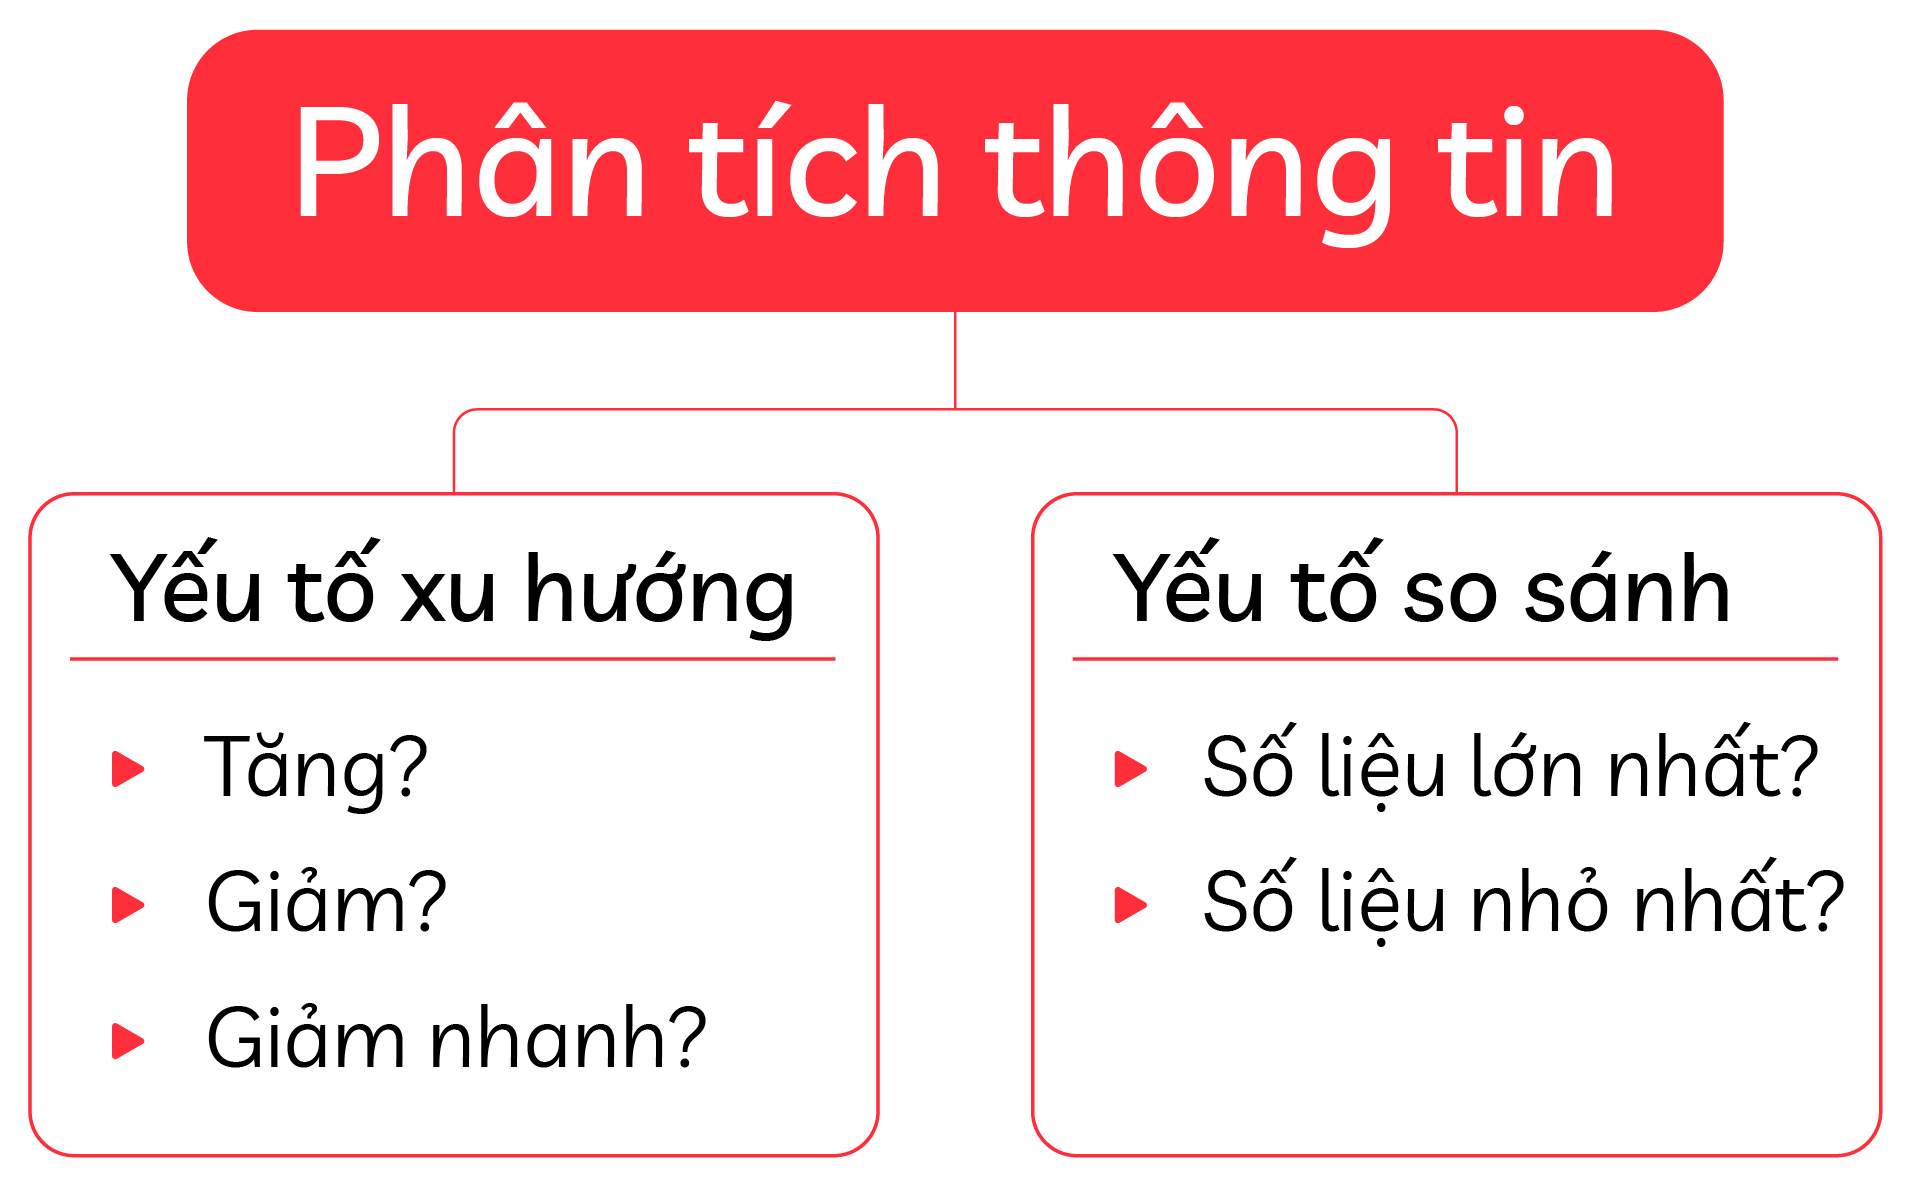 overview-ielts-writing-task-1-phan-tich-thong-tin